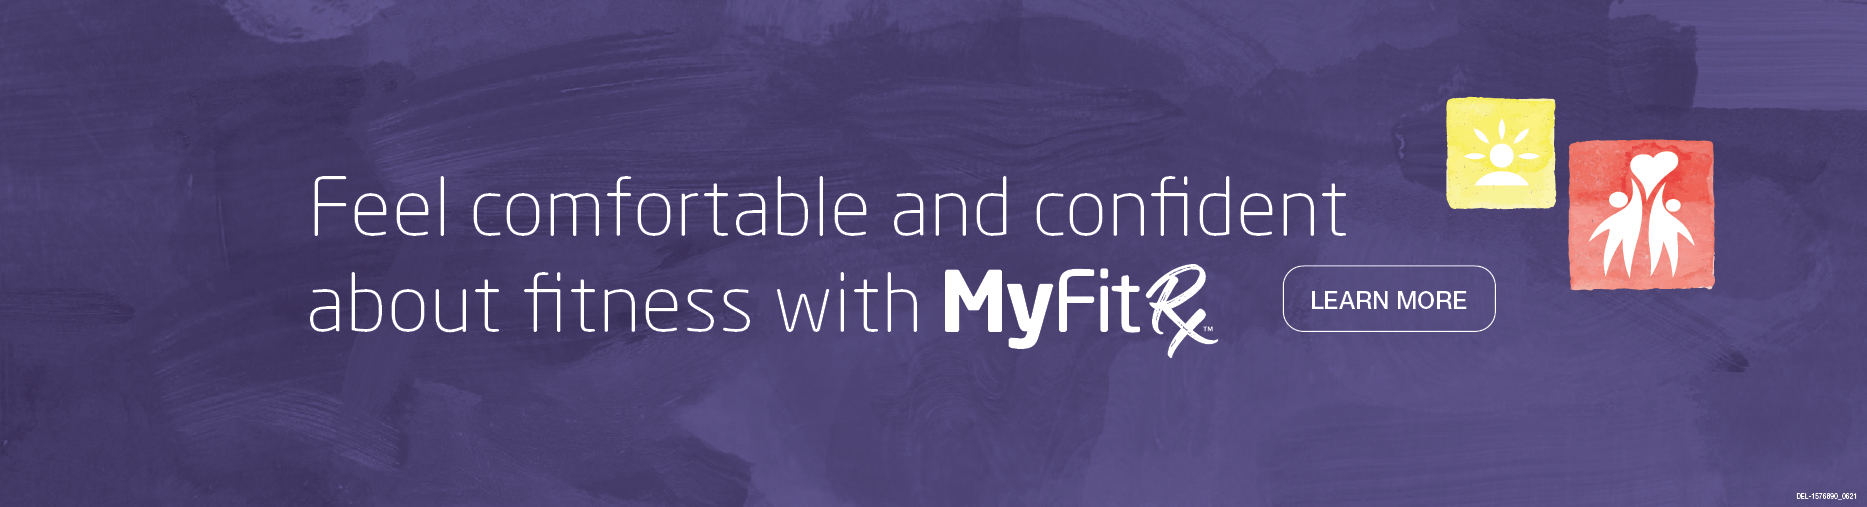 Feel comfortable and confident about fitness with MyFitRx pathways.